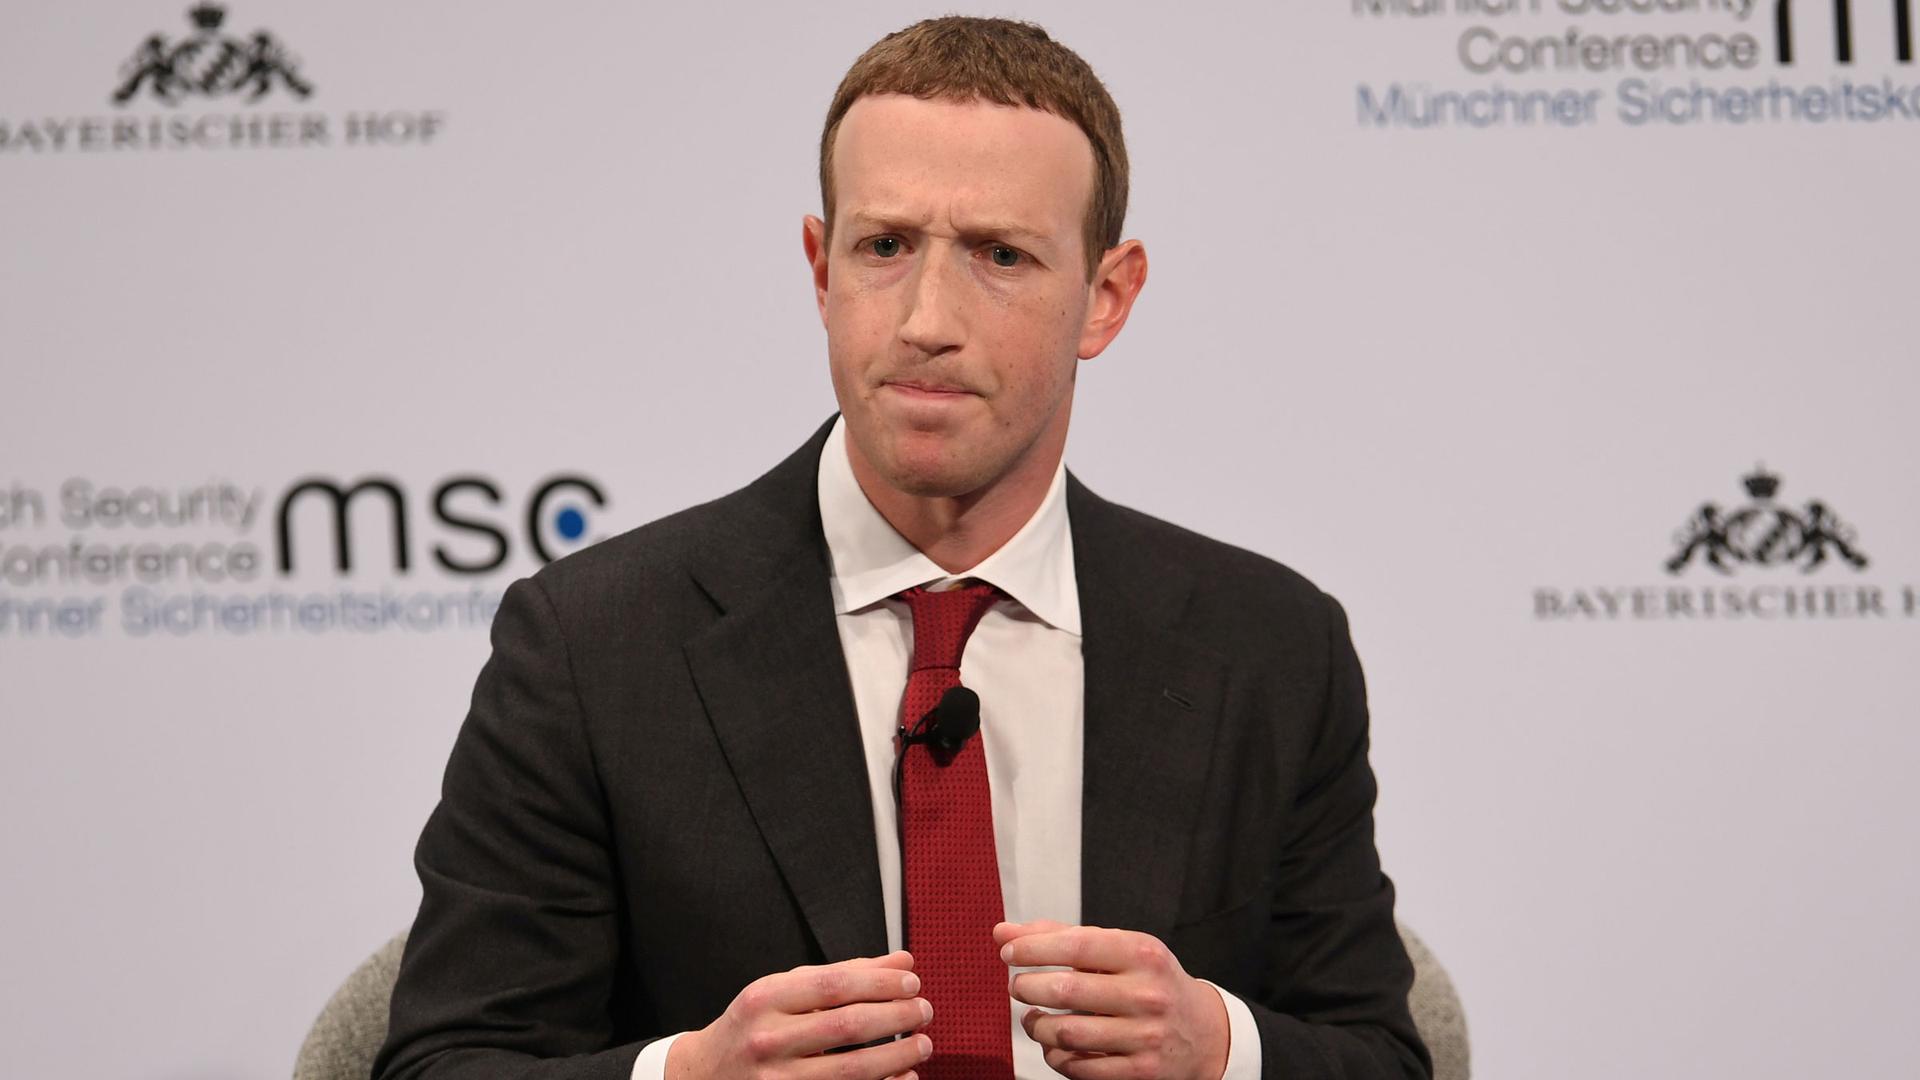 Facebook Chairman and CEO Mark Zuckerberg attends the annual Munich Security Conference in Germany, on Feb. 15, 2020.